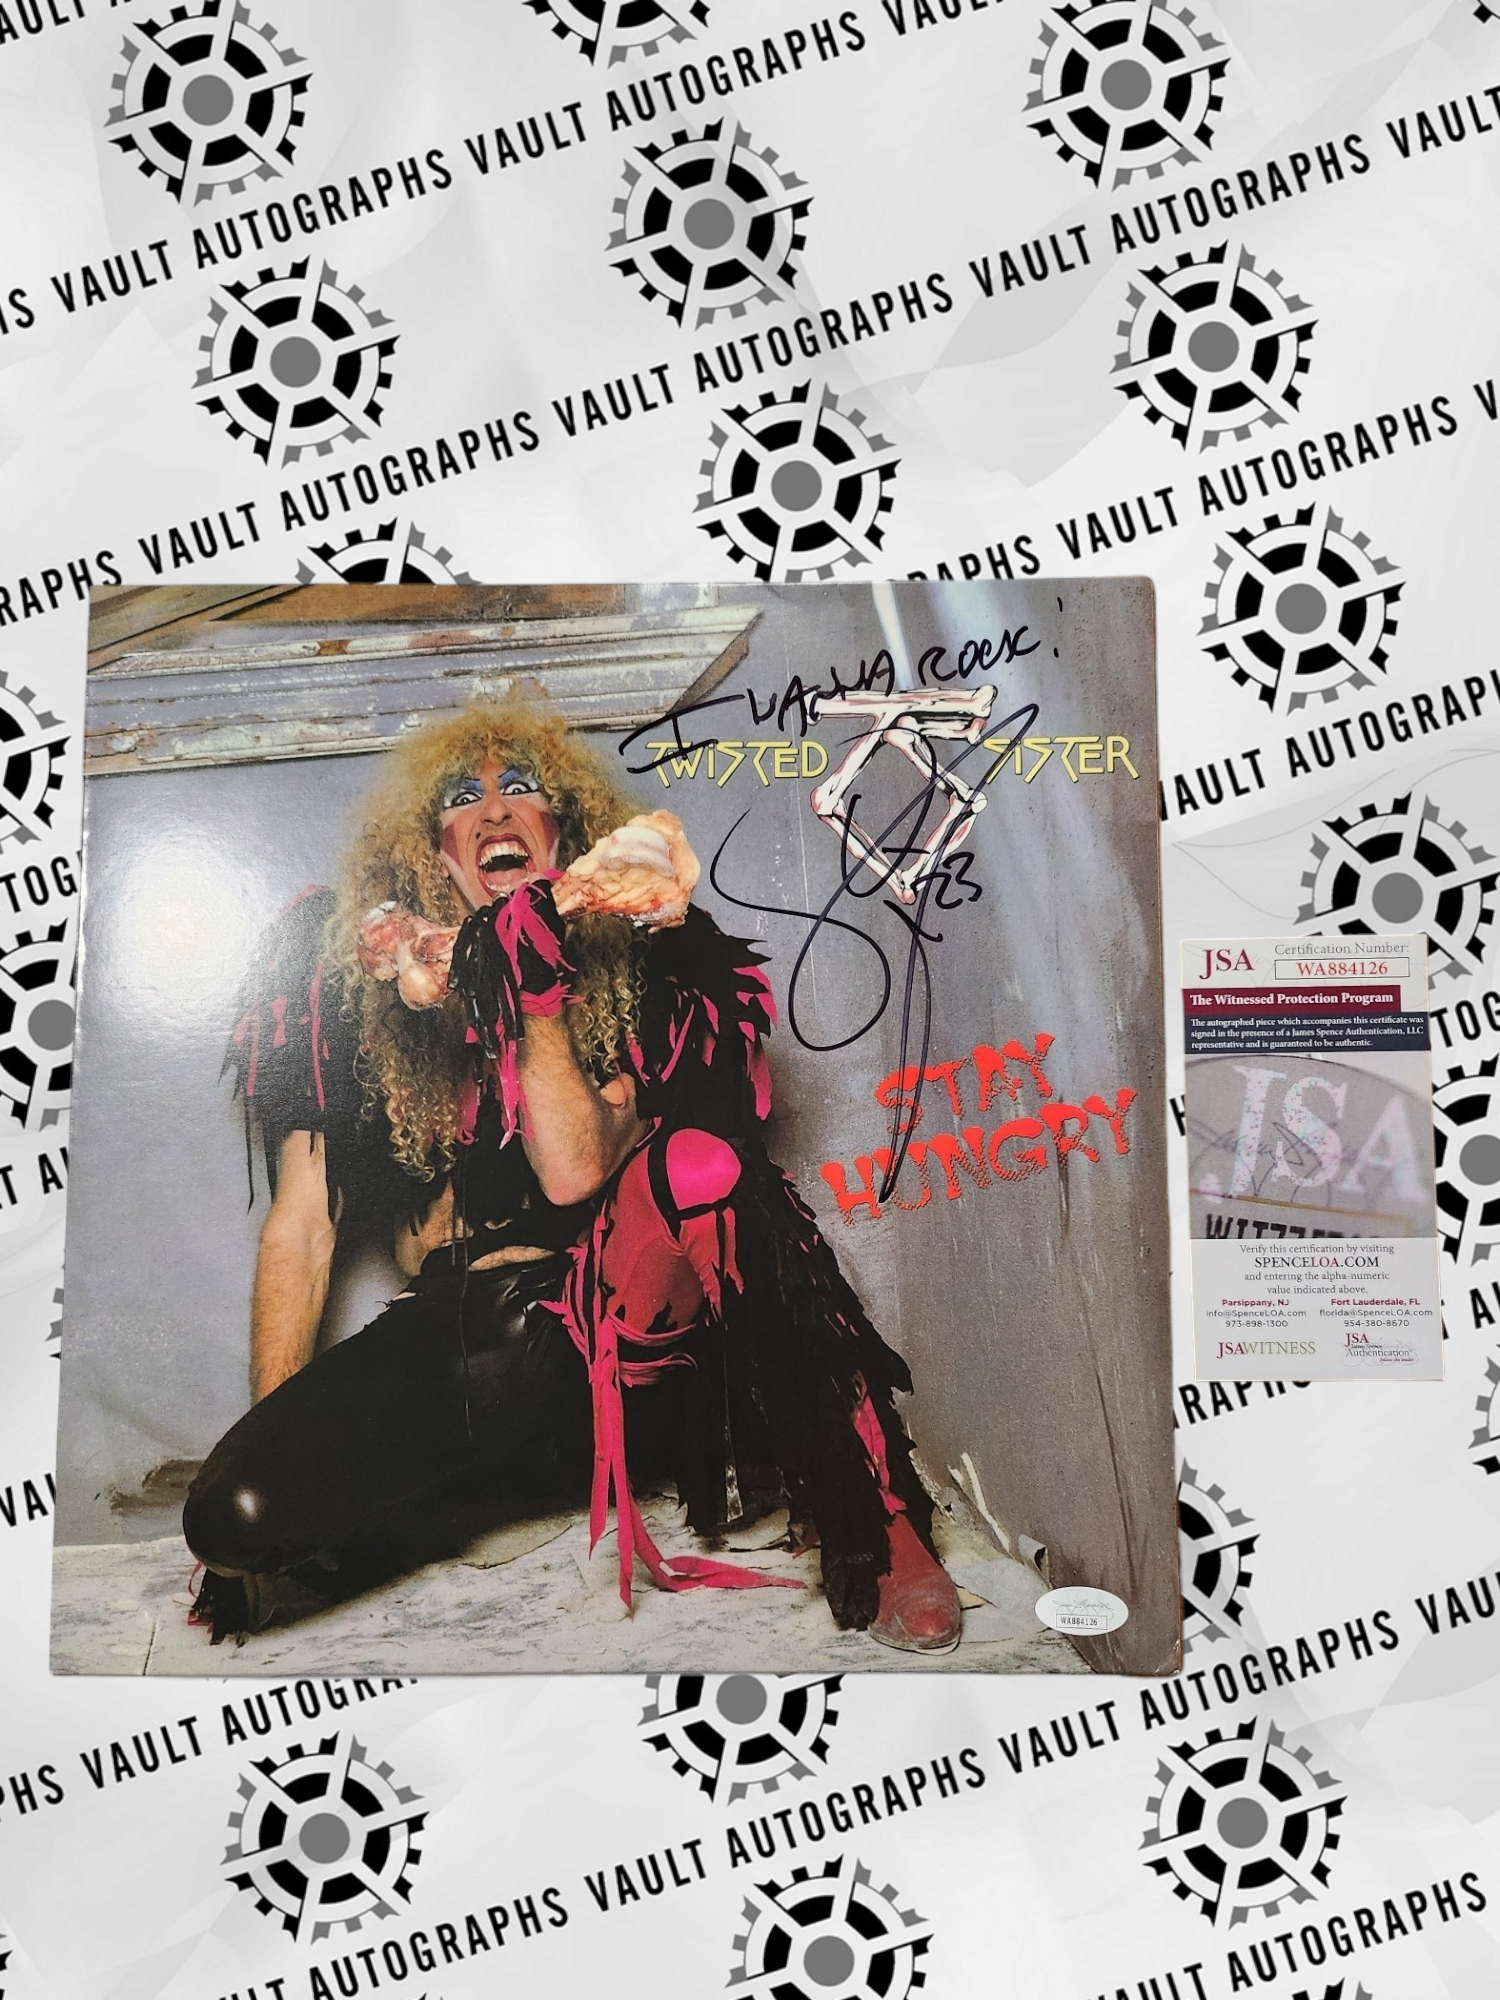 Stay Hungry Twisted Sister Vinyl Signed by Dee Snider with Inscription "I Wanna Rock"